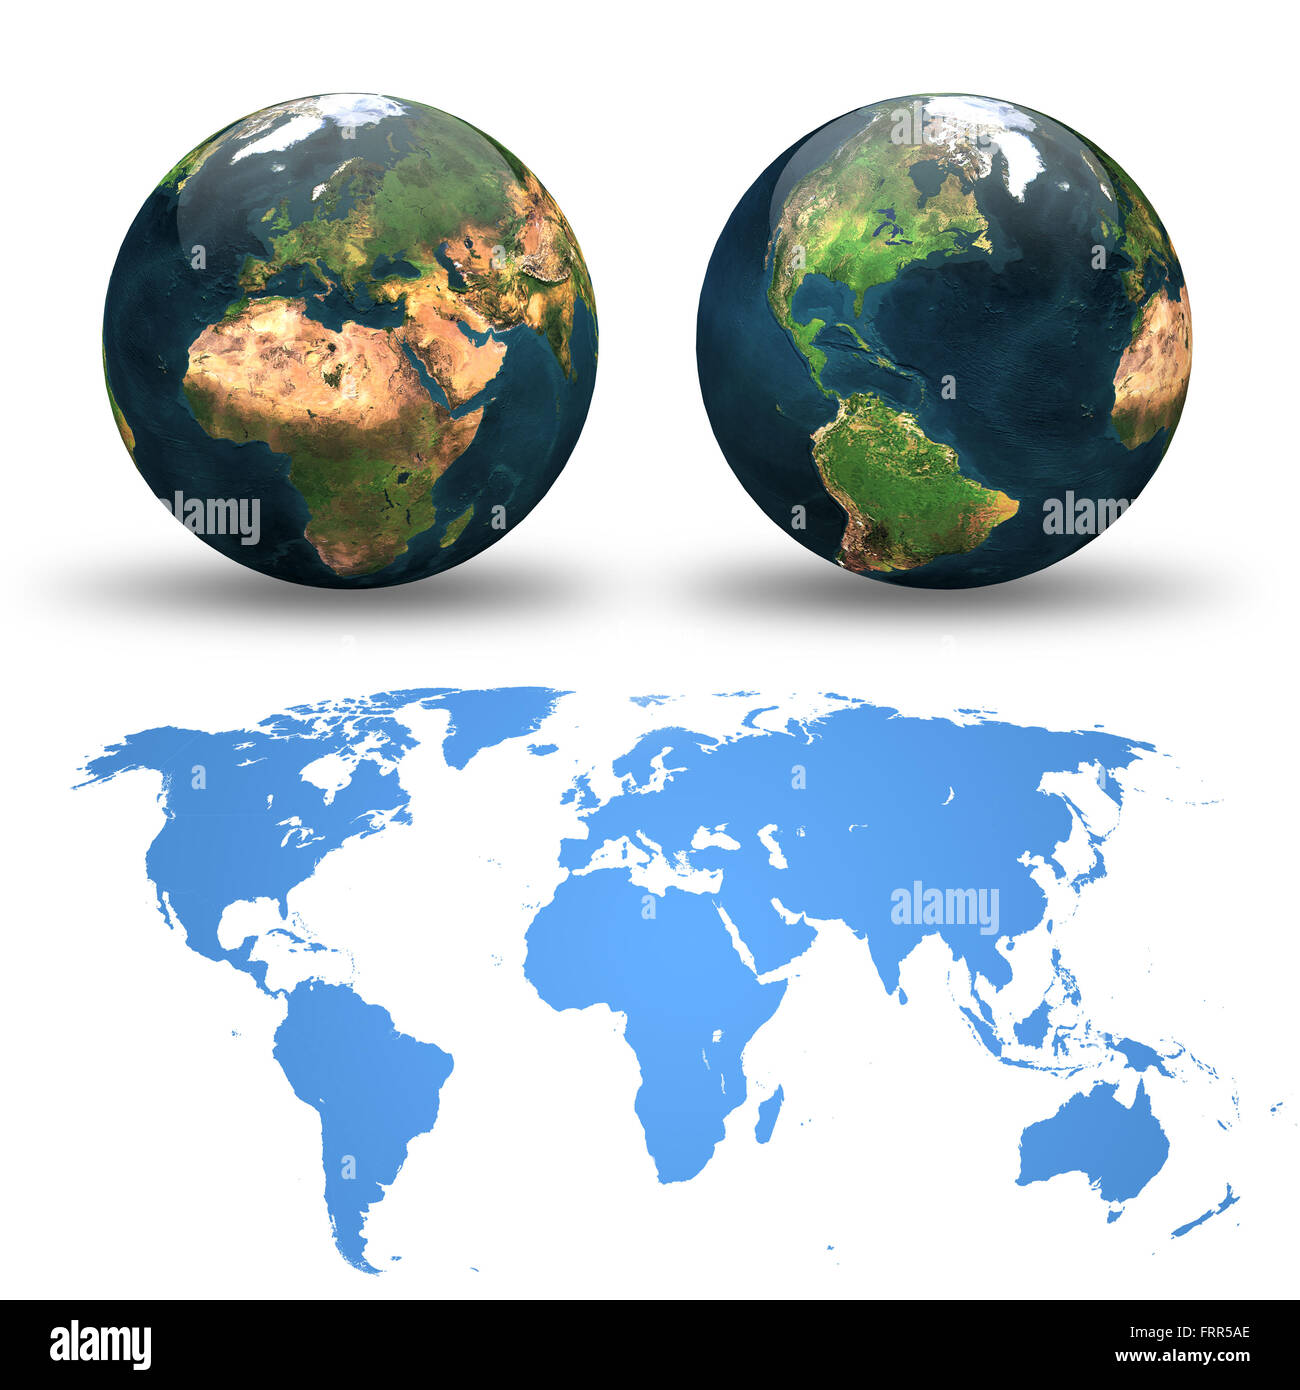 Globe and detail map of the world. Different views. Stock Photo